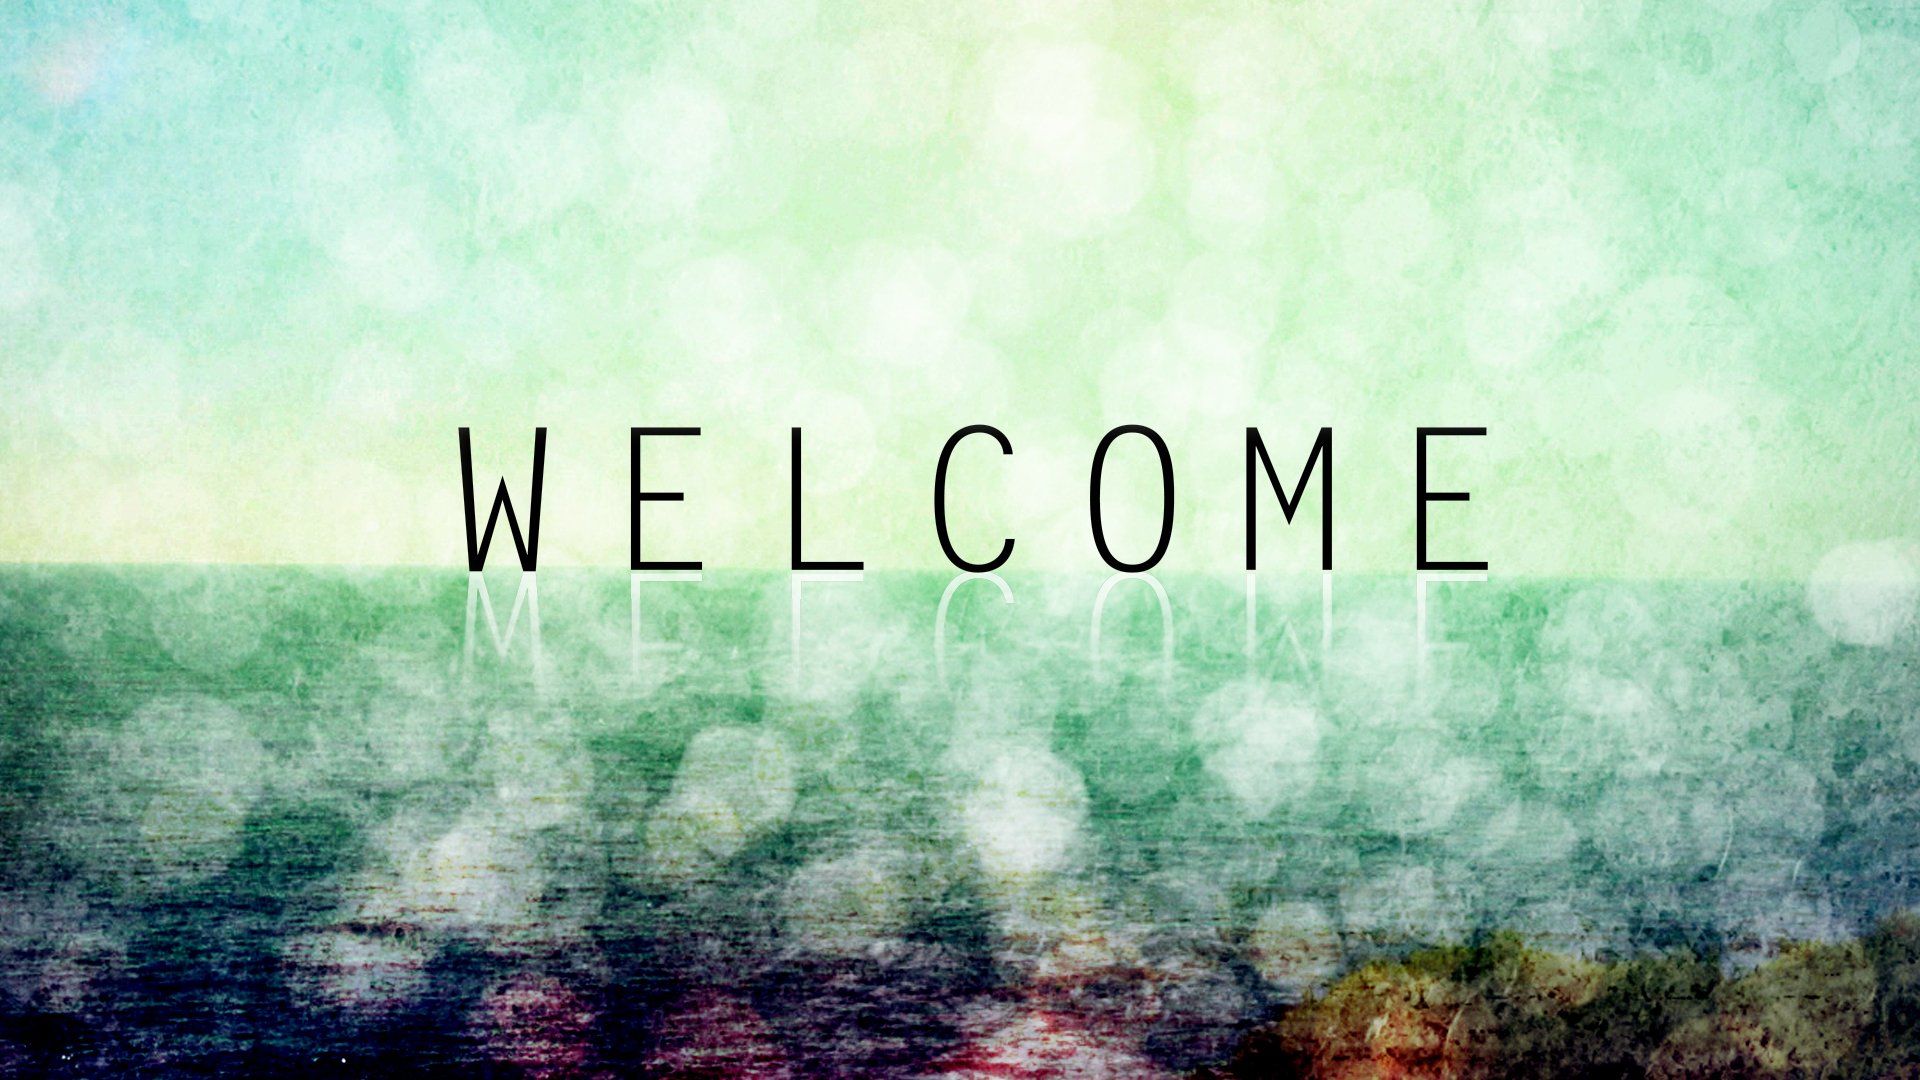 welcome to our church motion background